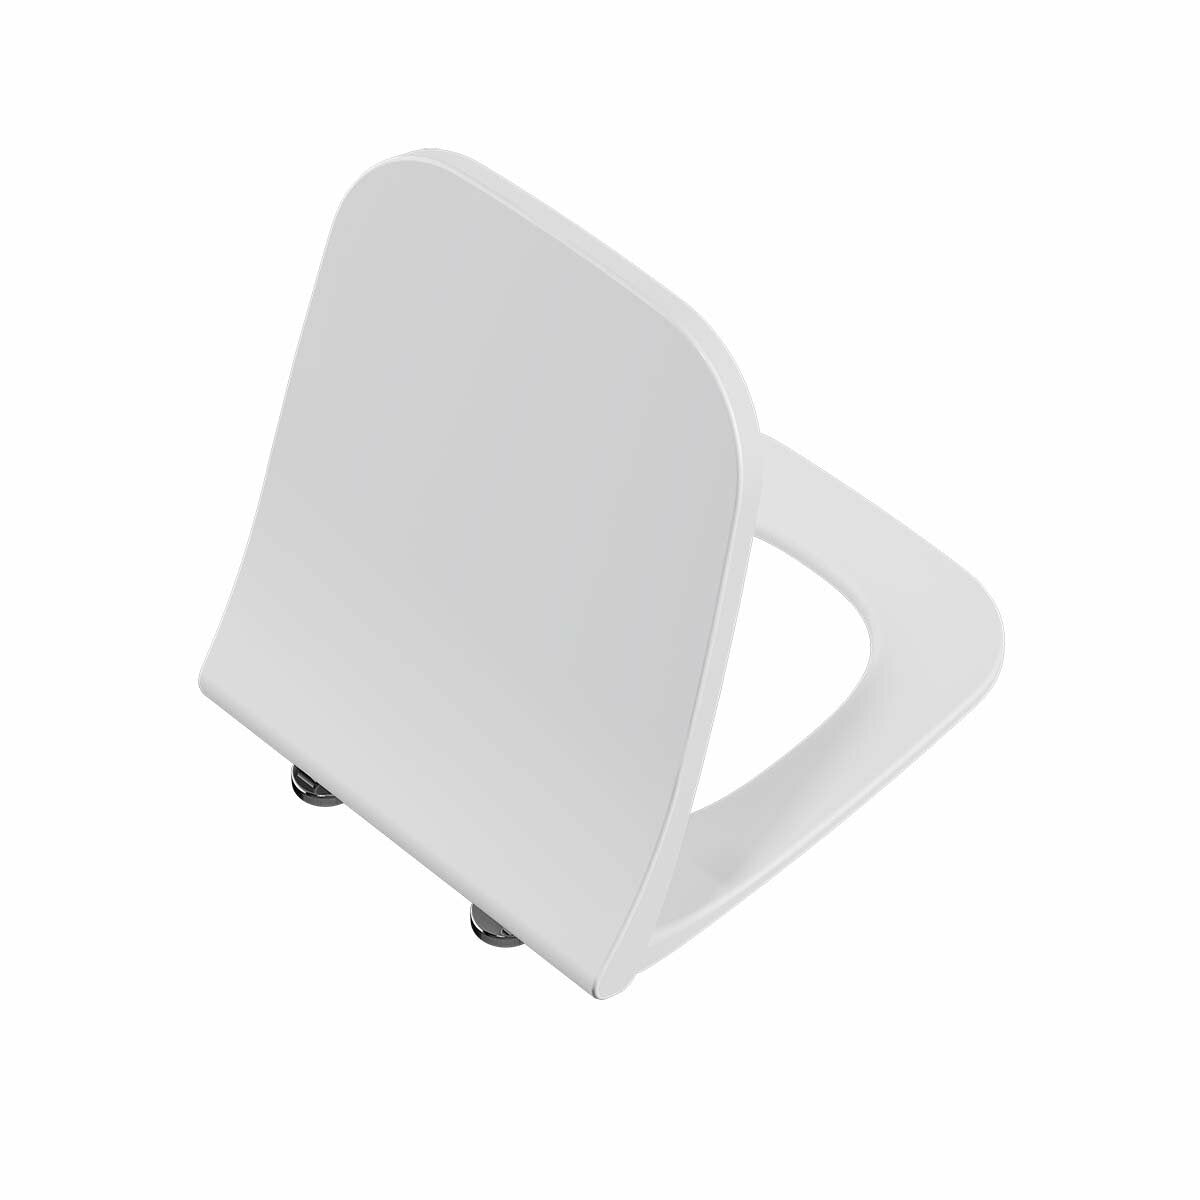 Kartell UK Eklipse Square Wall Hung Rimless WC Pan with Soft Close Seat